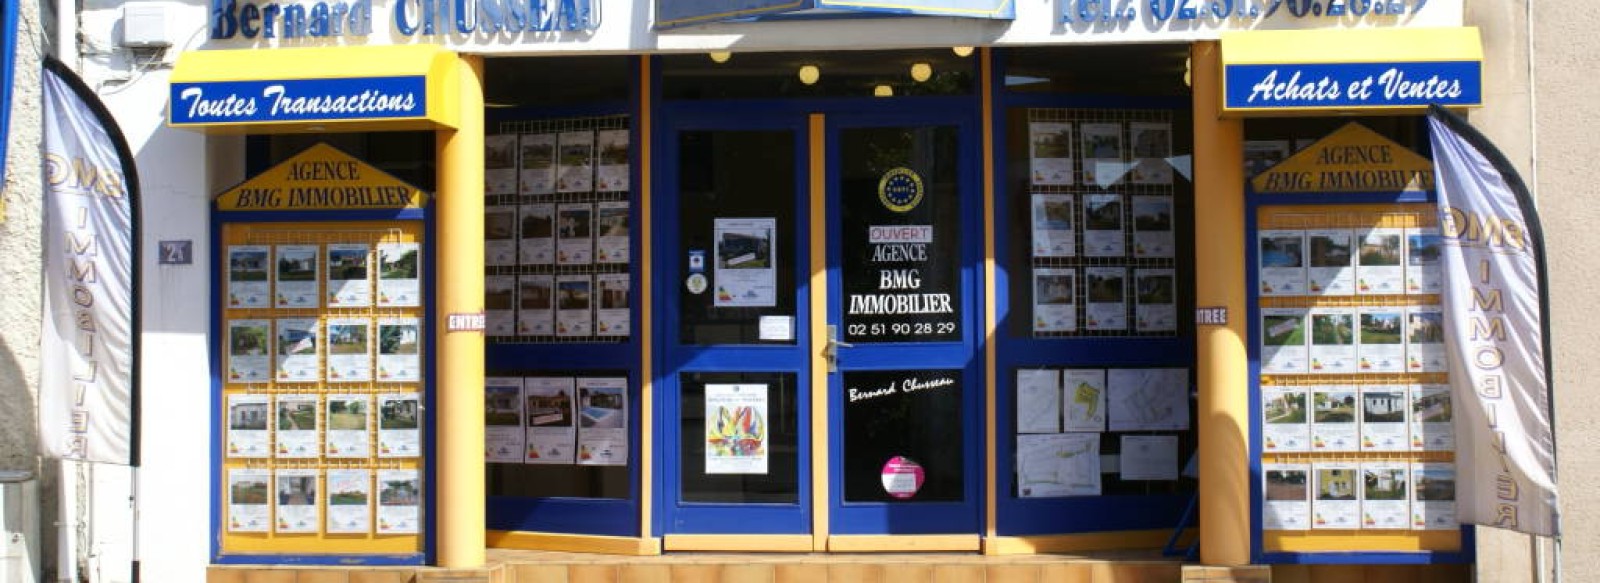 BMG IMMOBILIER